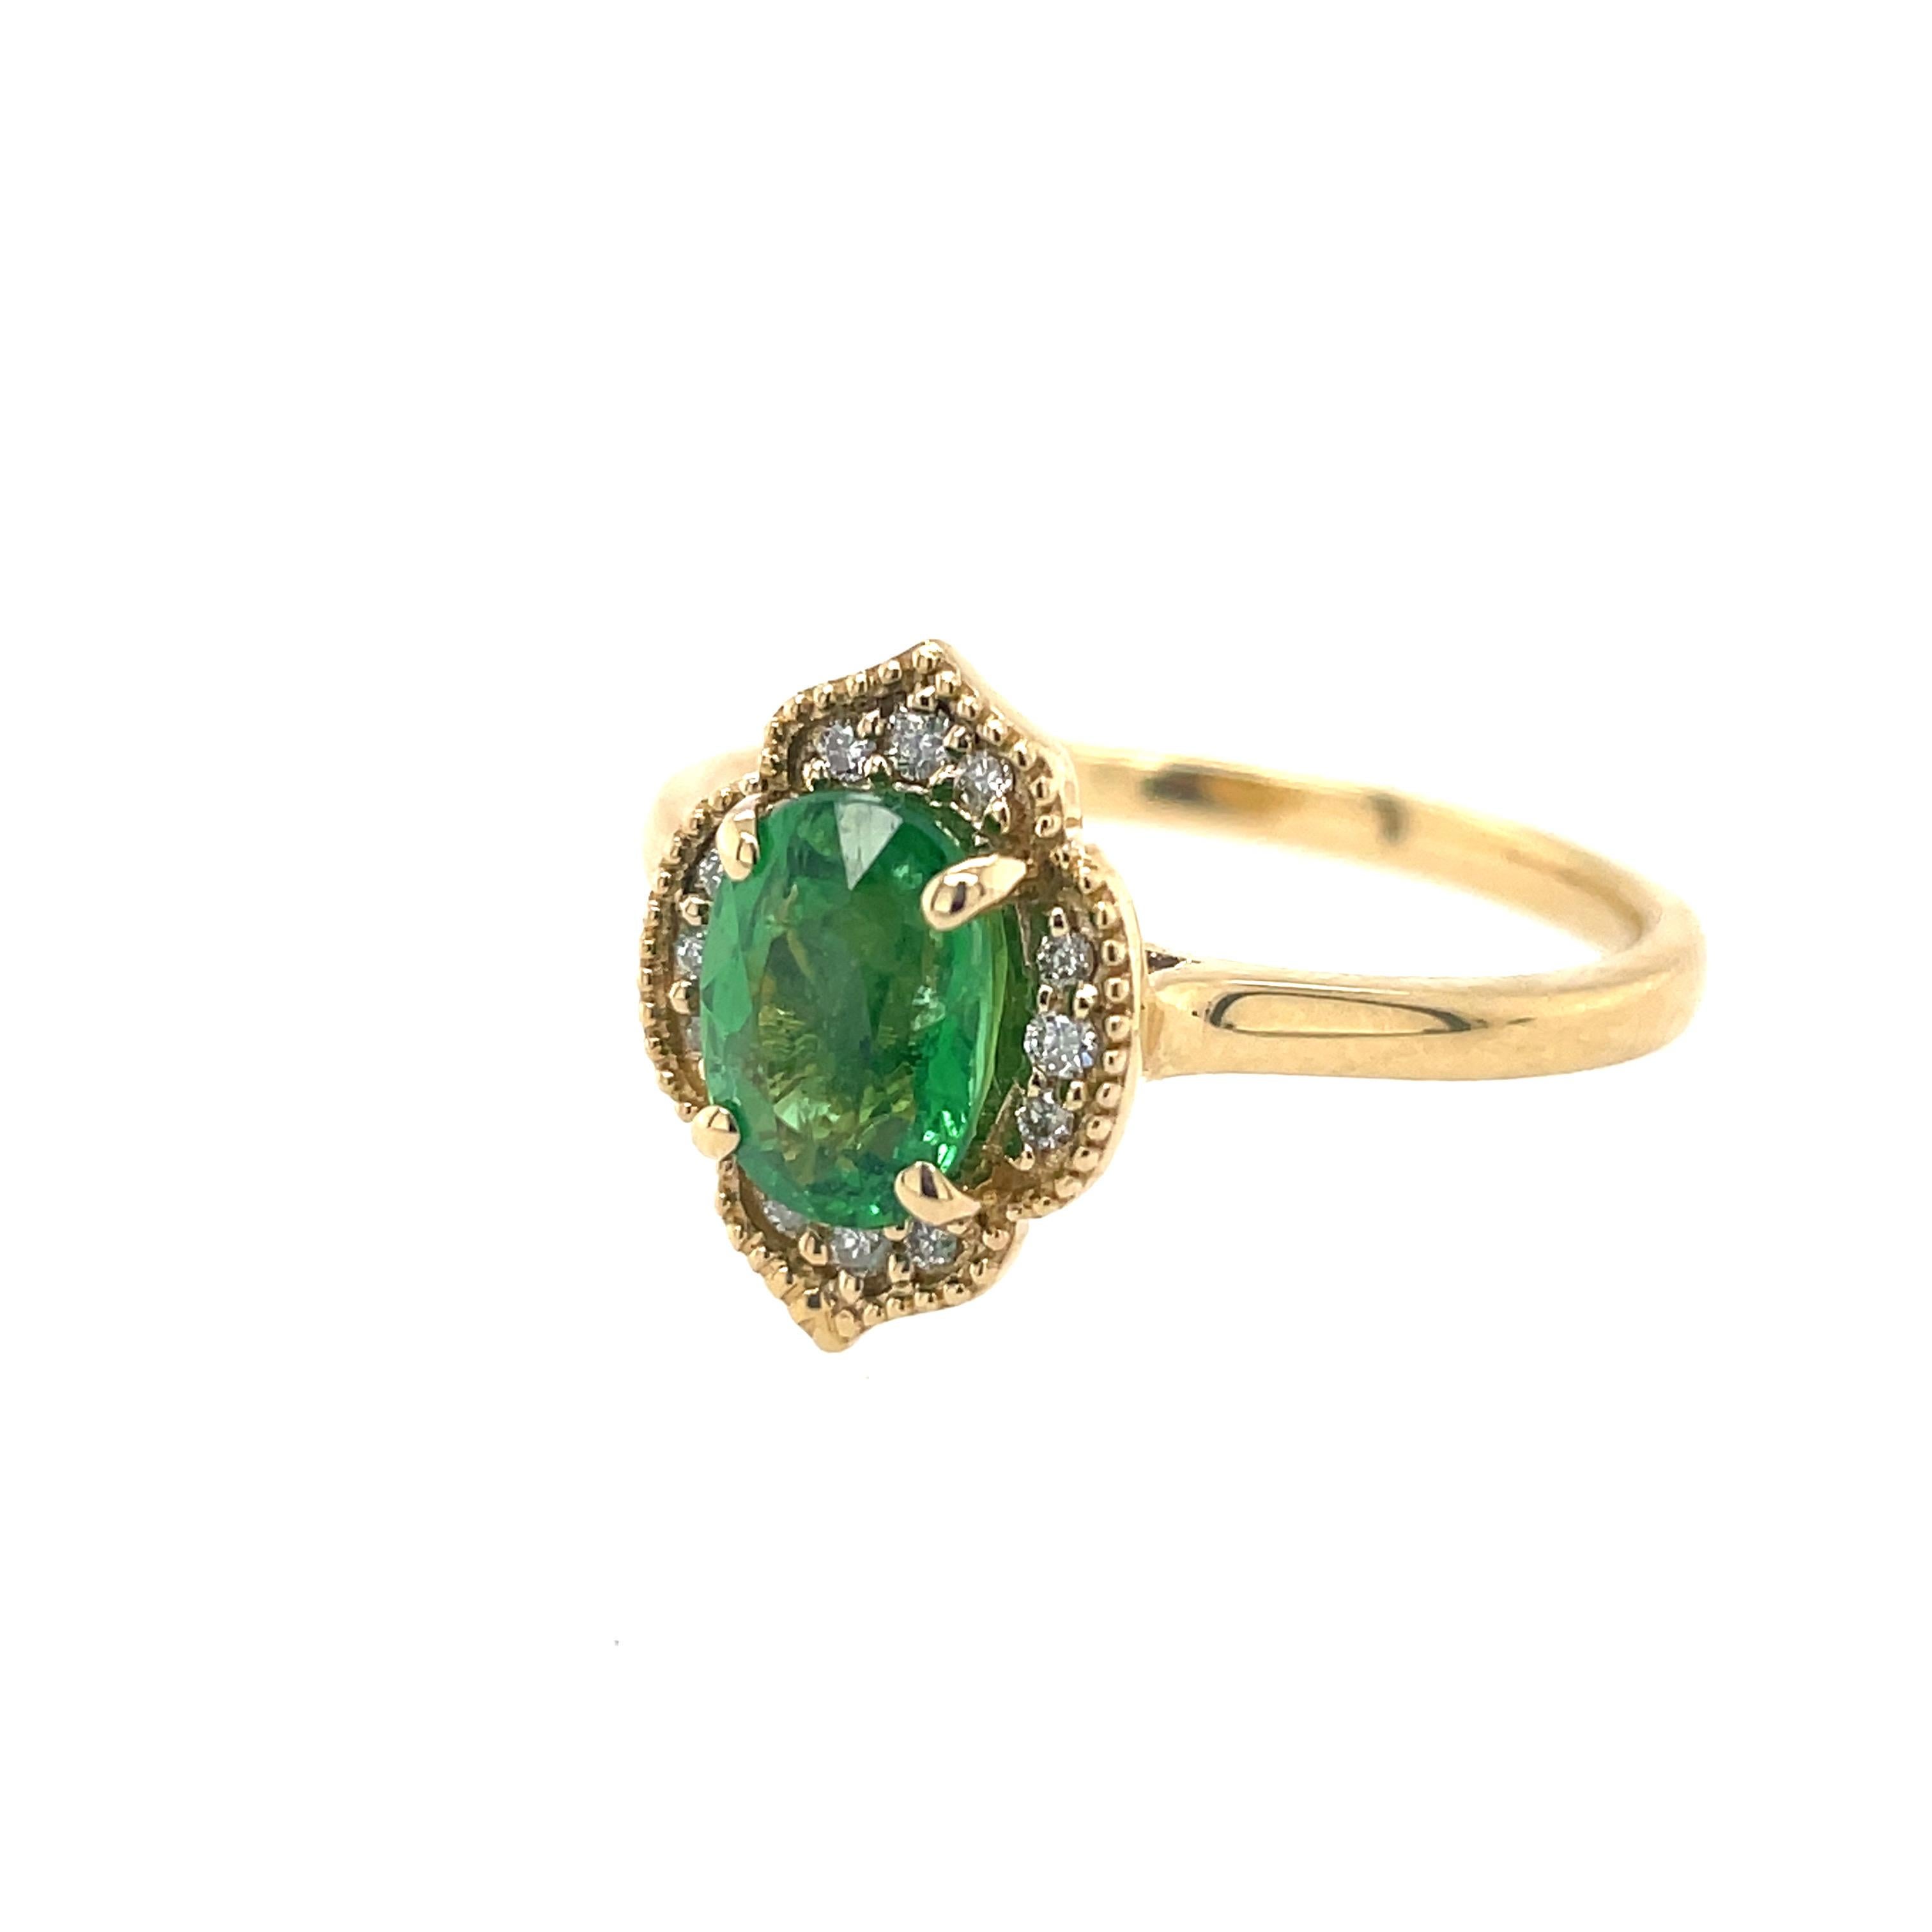 Tsavorite Garnet Ring, 1.20ct Center Gem, Vintage Design, Yellow Gold In New Condition For Sale In Mission Viejo, CA